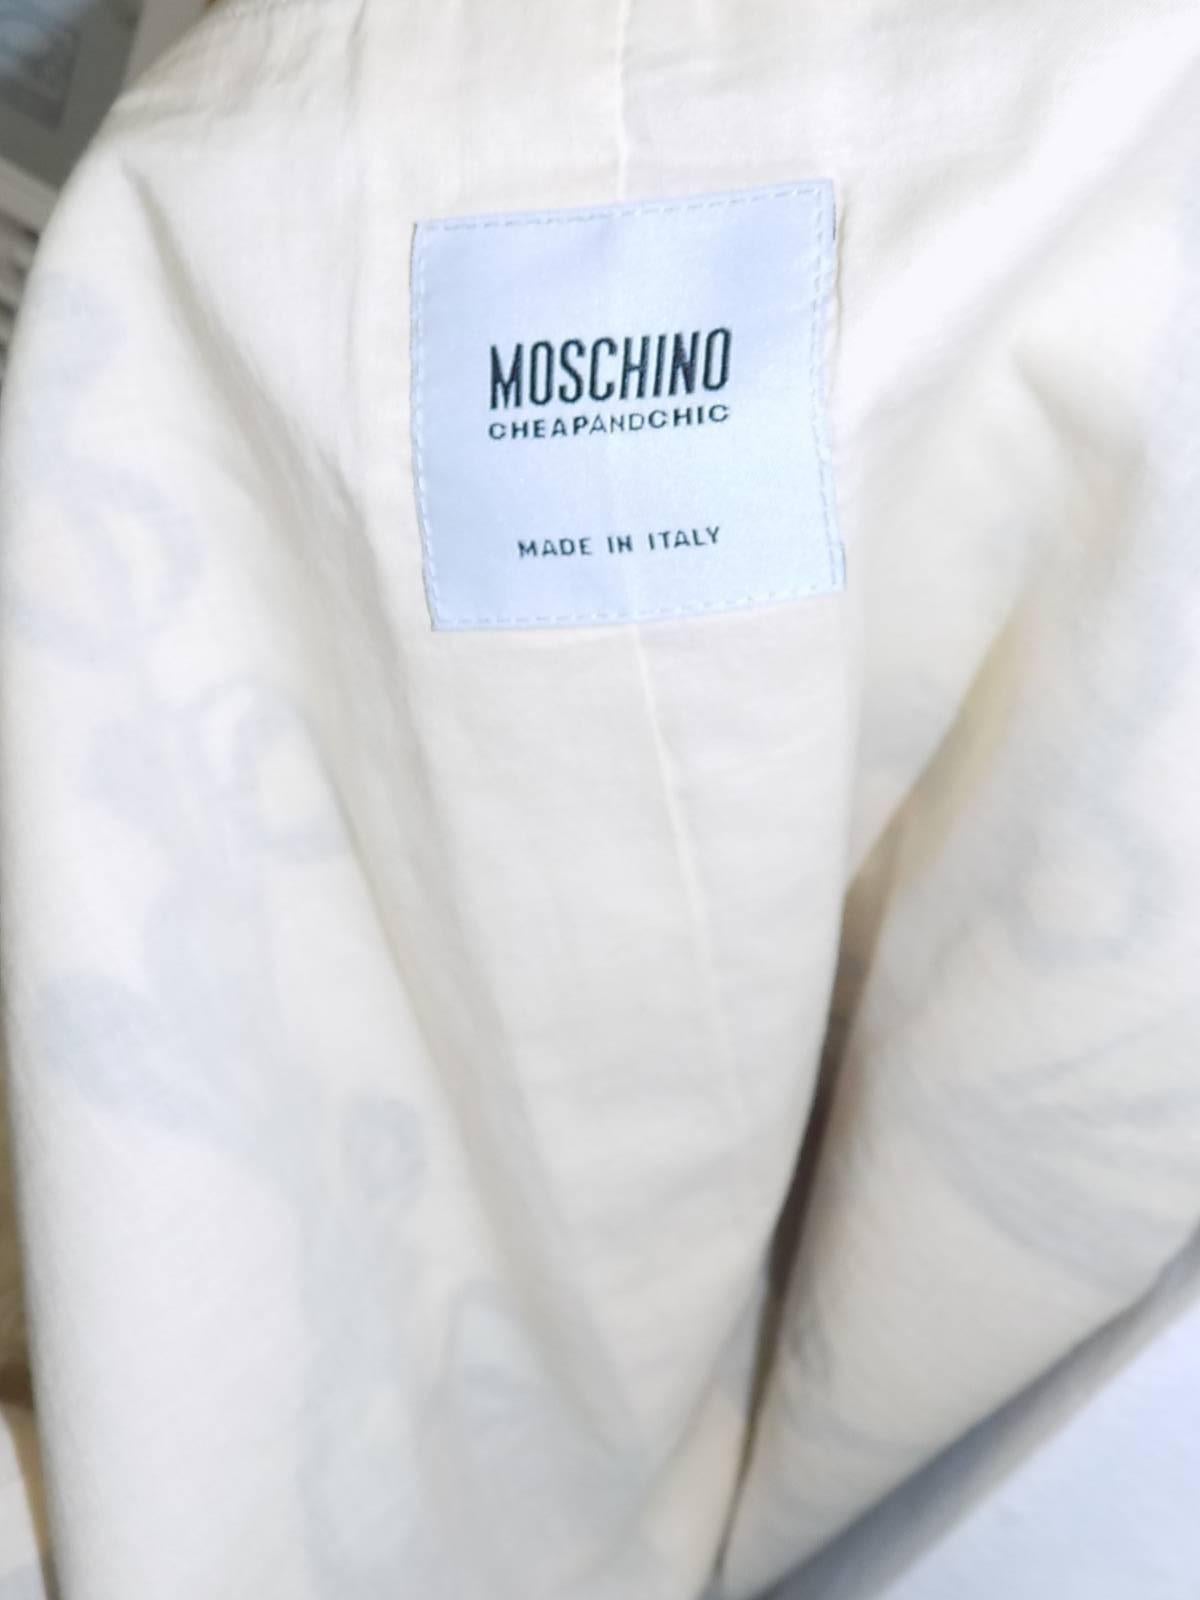 Moschino Rare   Dress and Jacket Cotton  Ensemble For Sale 4